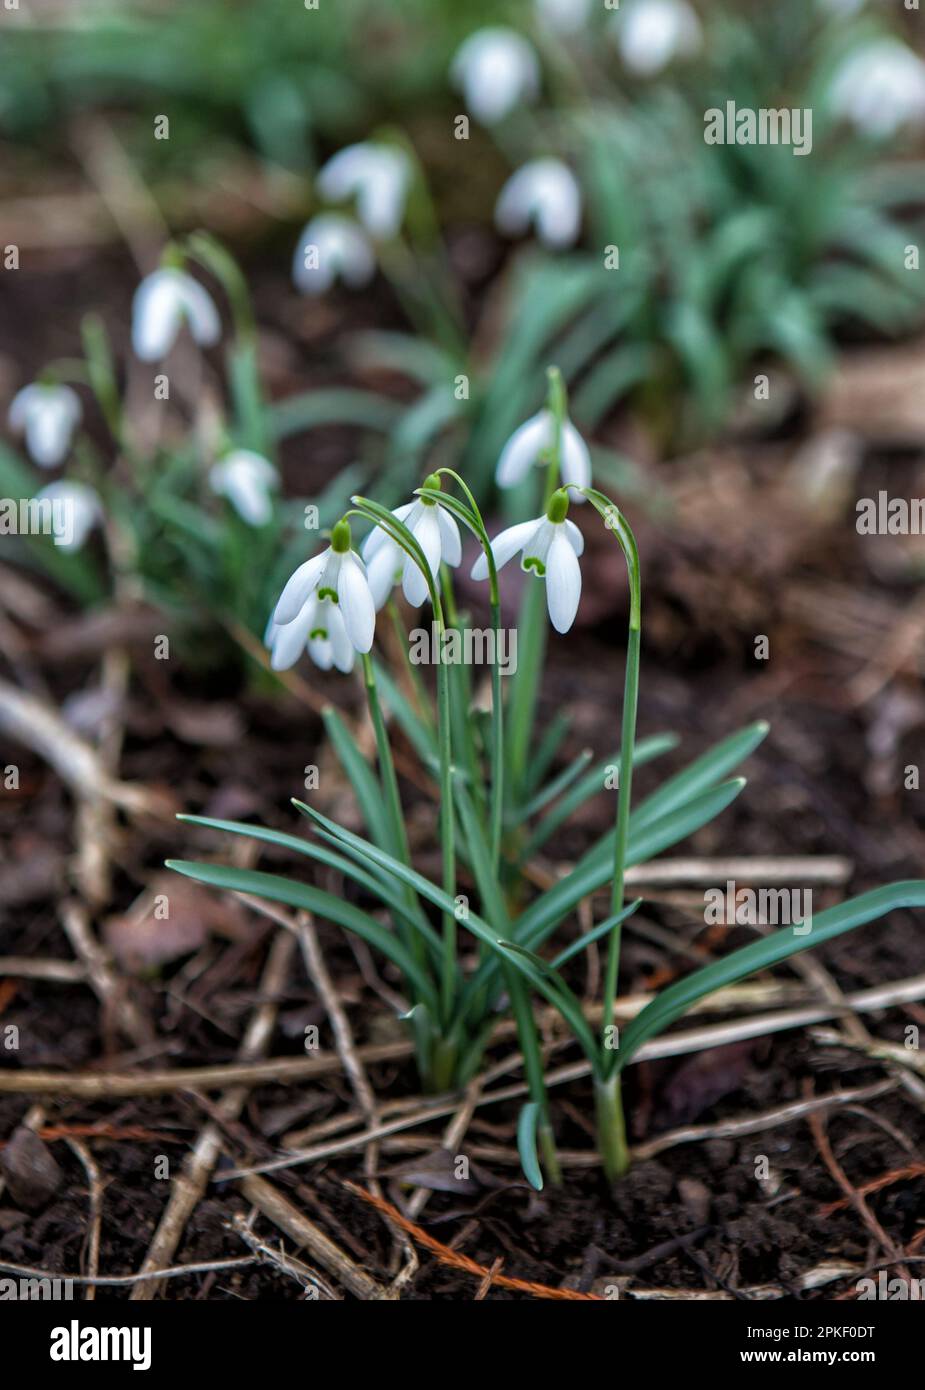 Snowdrops (Galanthus nivalis) flowers. Snowdrops are the first flowers of spring. We can see them when the snow starts to melt. Stock Photo